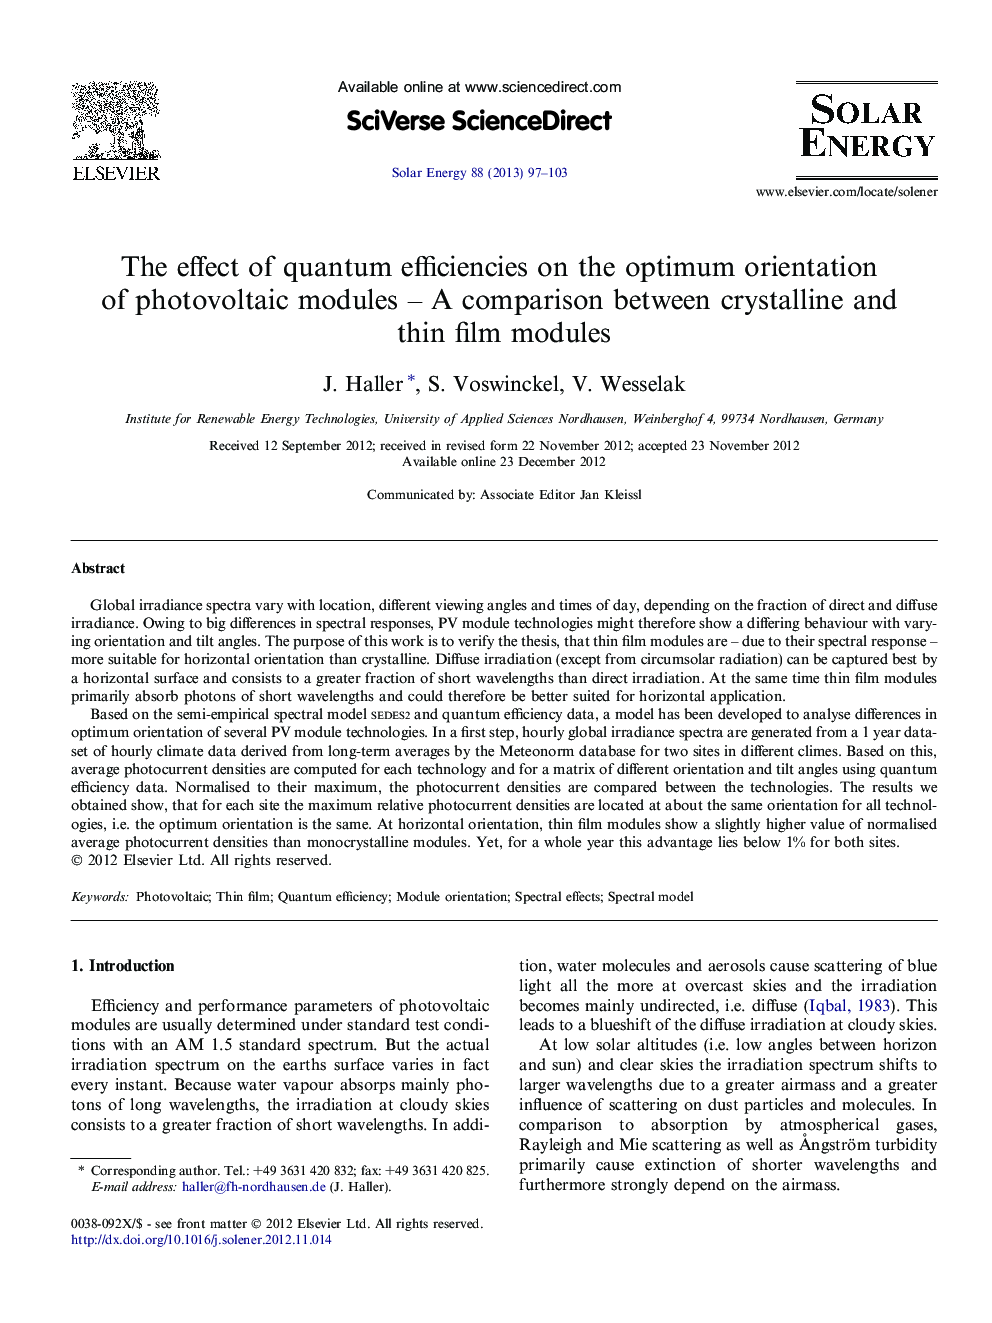 The effect of quantum efficiencies on the optimum orientation of photovoltaic modules – A comparison between crystalline and thin film modules